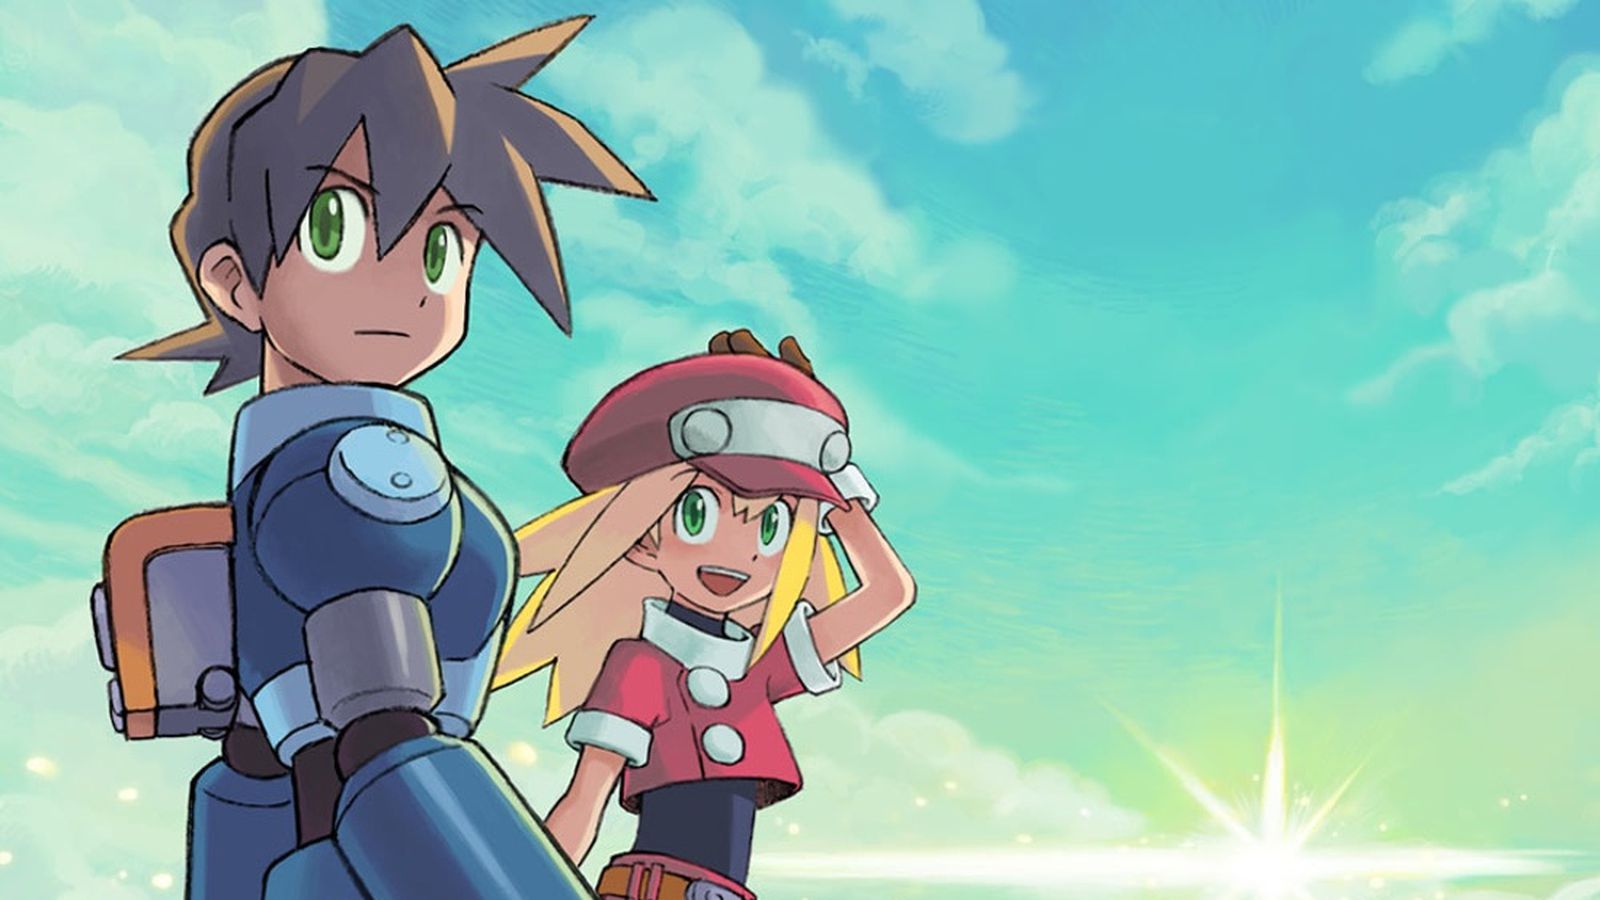 Mega Man Legends is heading to the PlayStation Store.